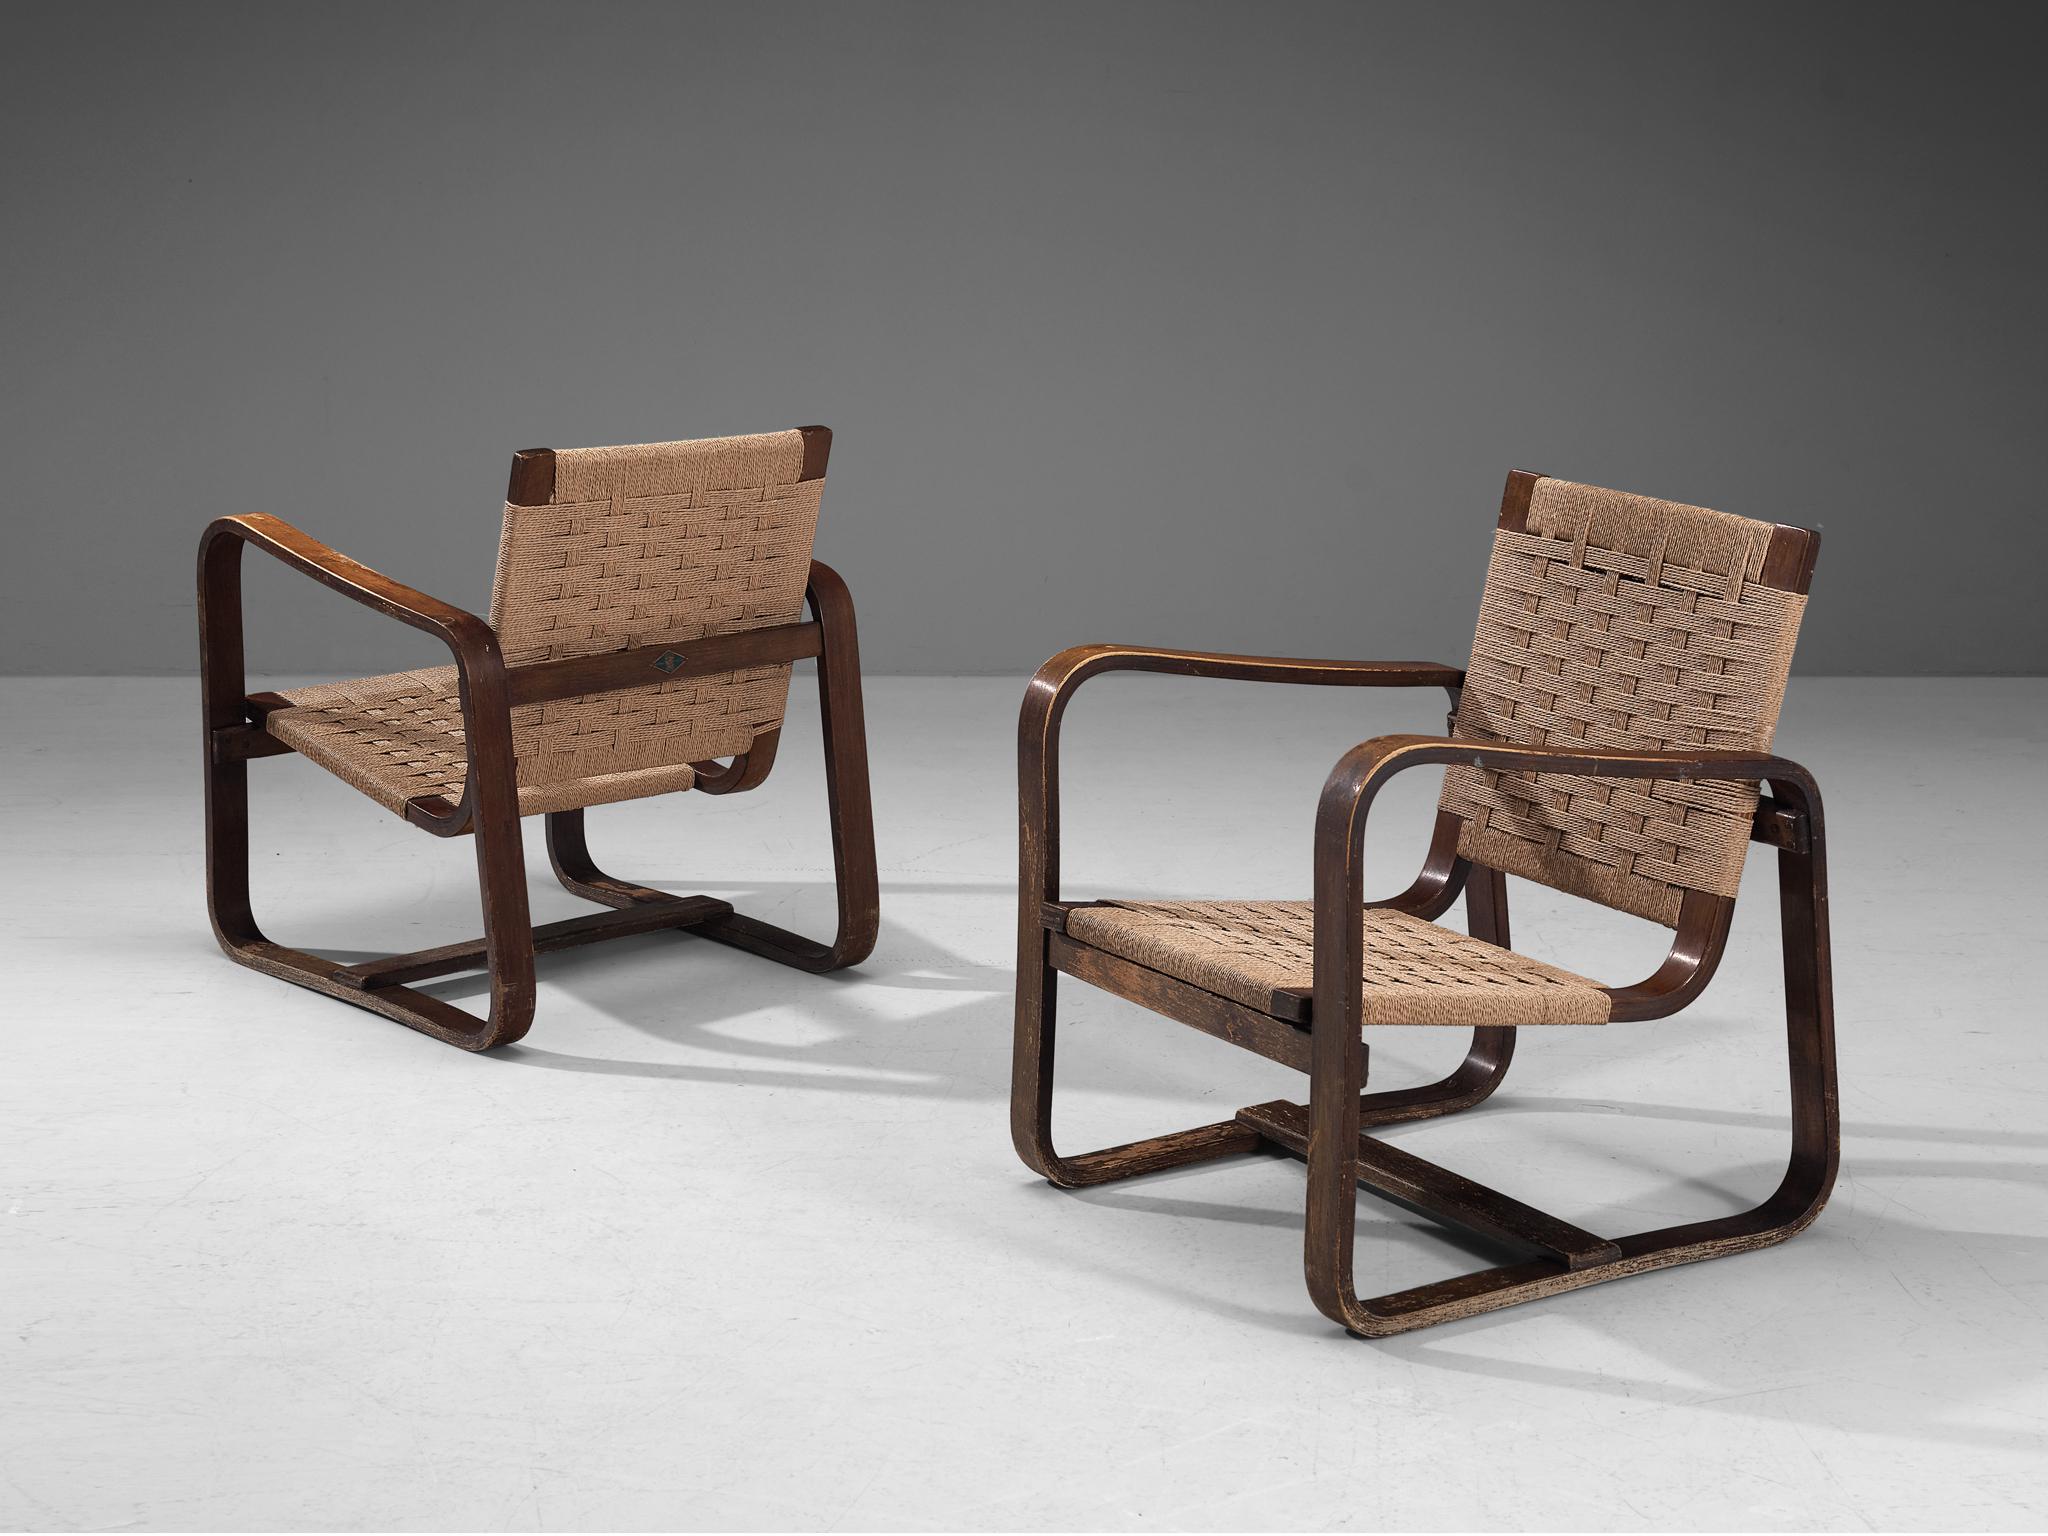 Giuseppe Pagano Pogatschnig & Gino Maggioni, pair of lounge chairs, walnut, natural cord, Italy, 1940

Giuseppe Pagano Pogatschnig (1896-1945) and Gino Maggioni (1898-1955) designed this bentwood armchair initially in 1940 for ‘l’Università